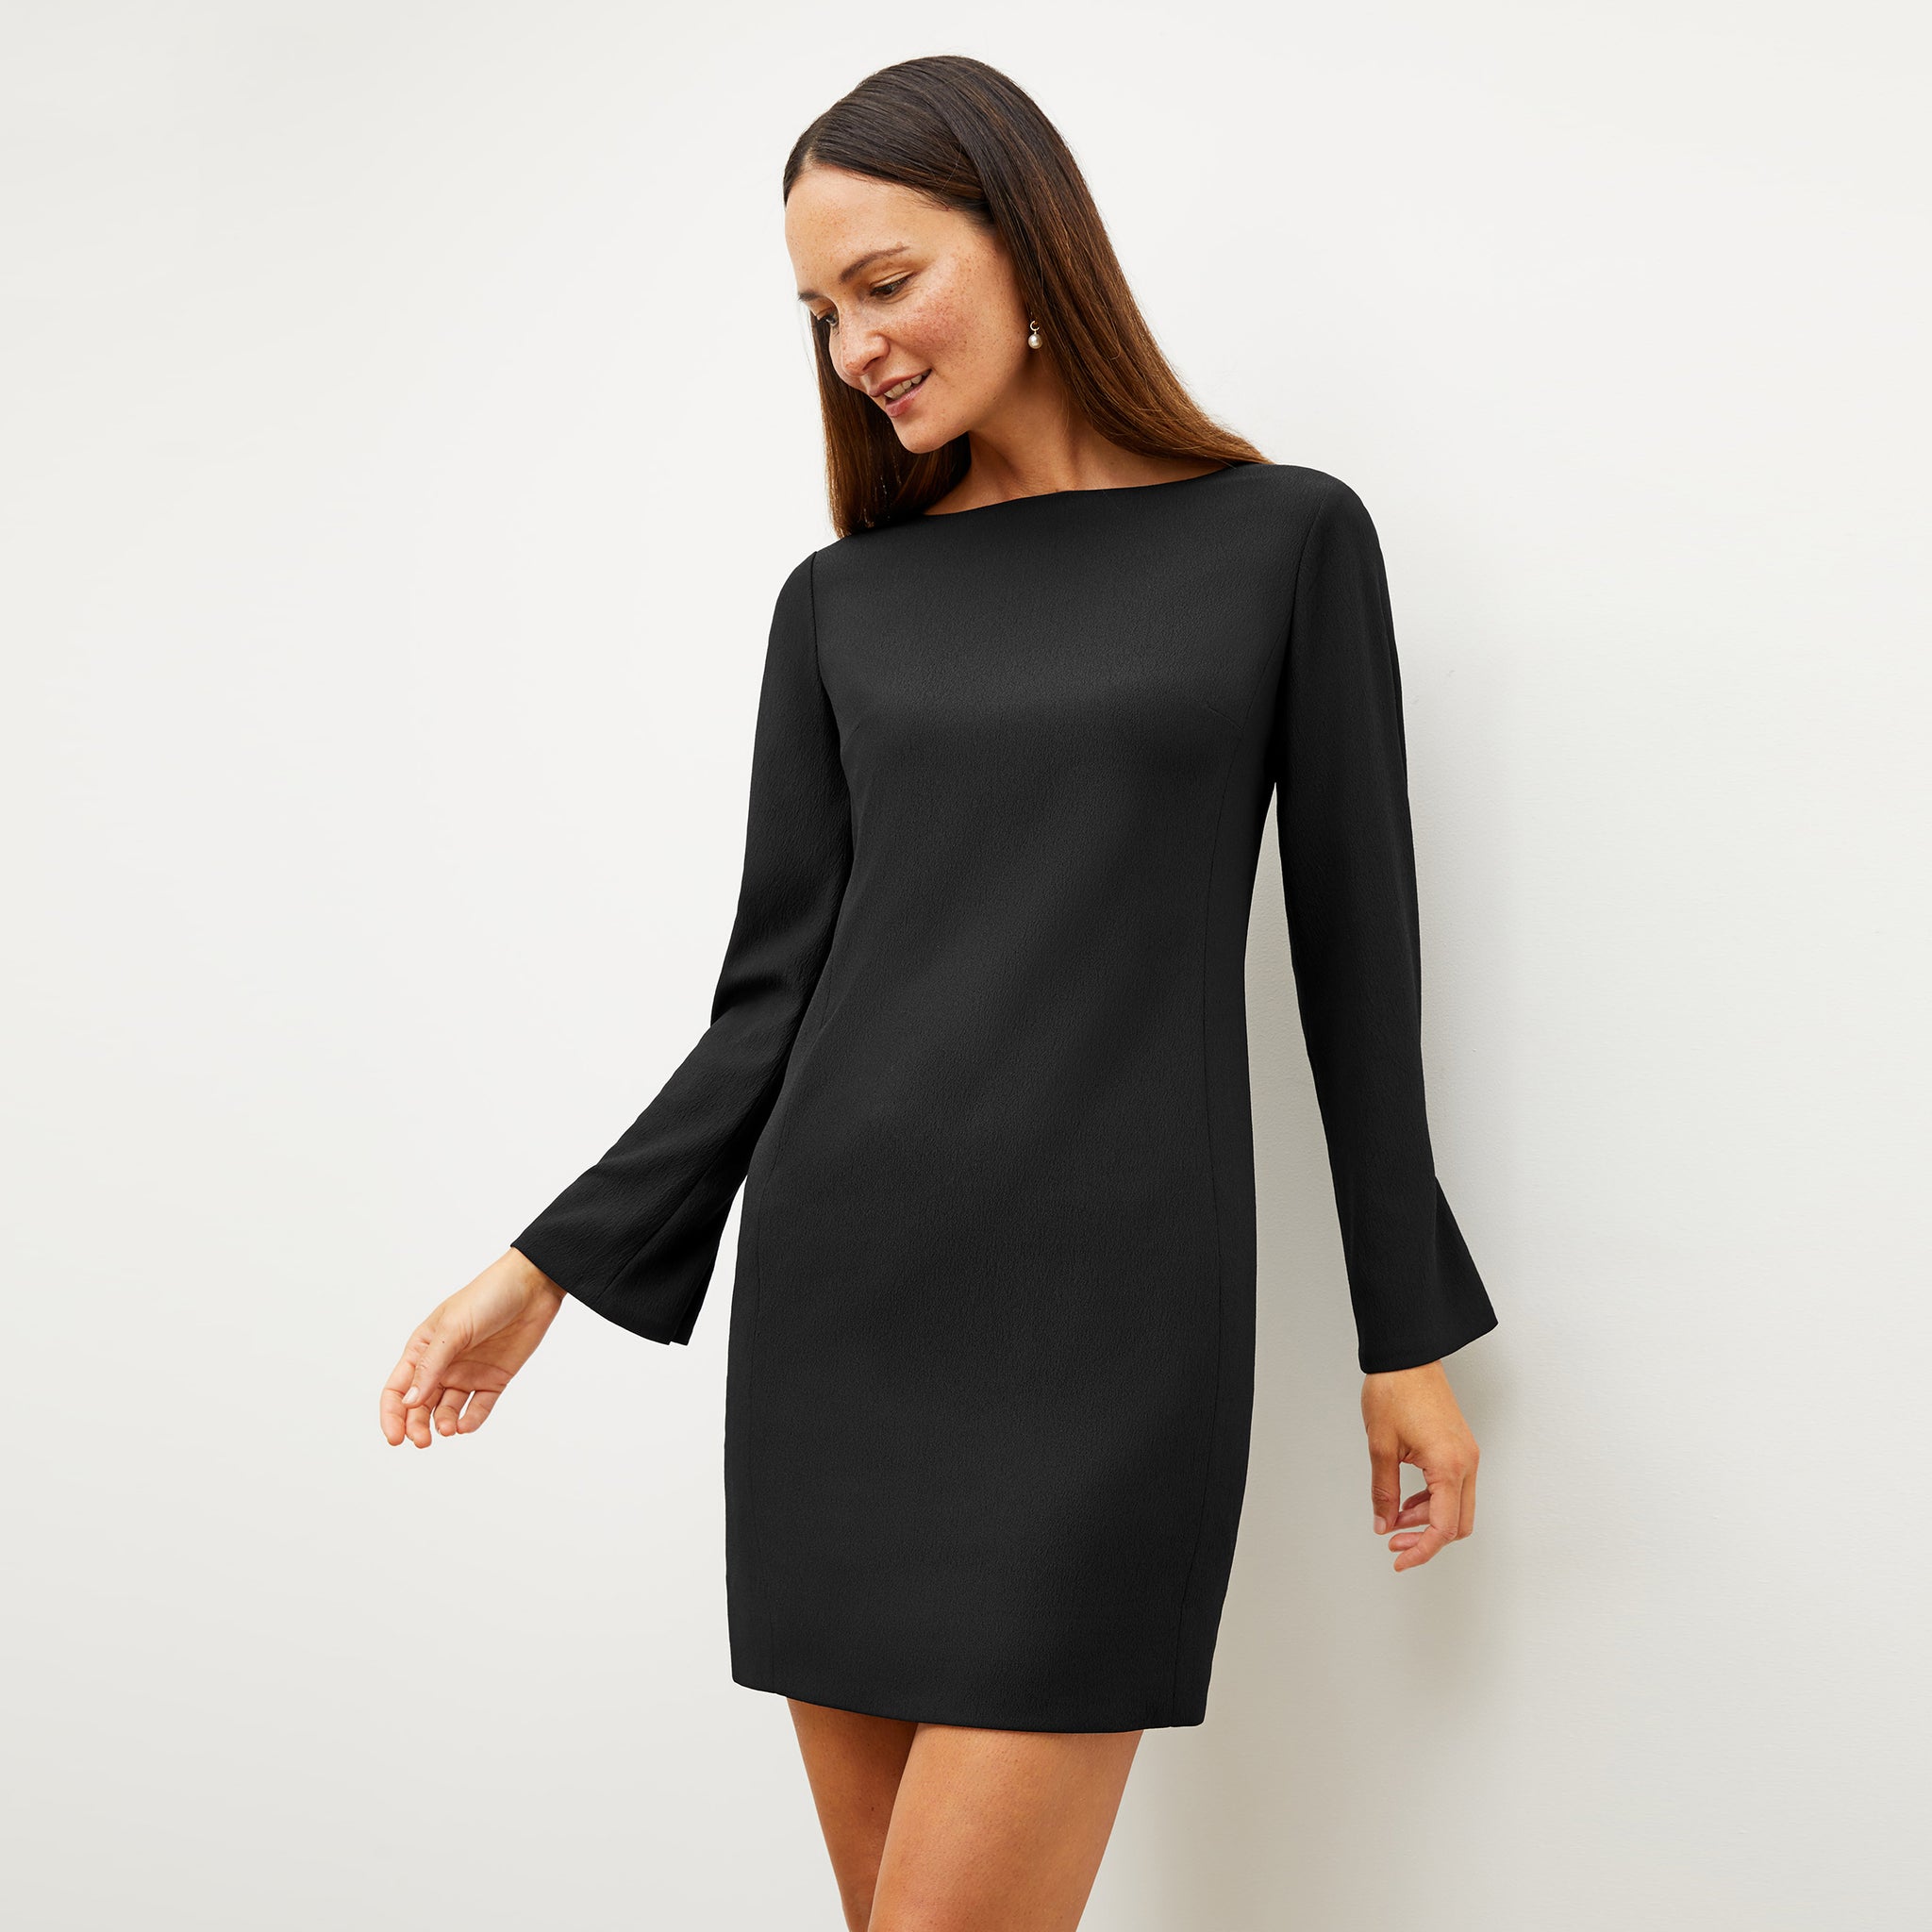 Front image of a woman wearing the regina dress in black